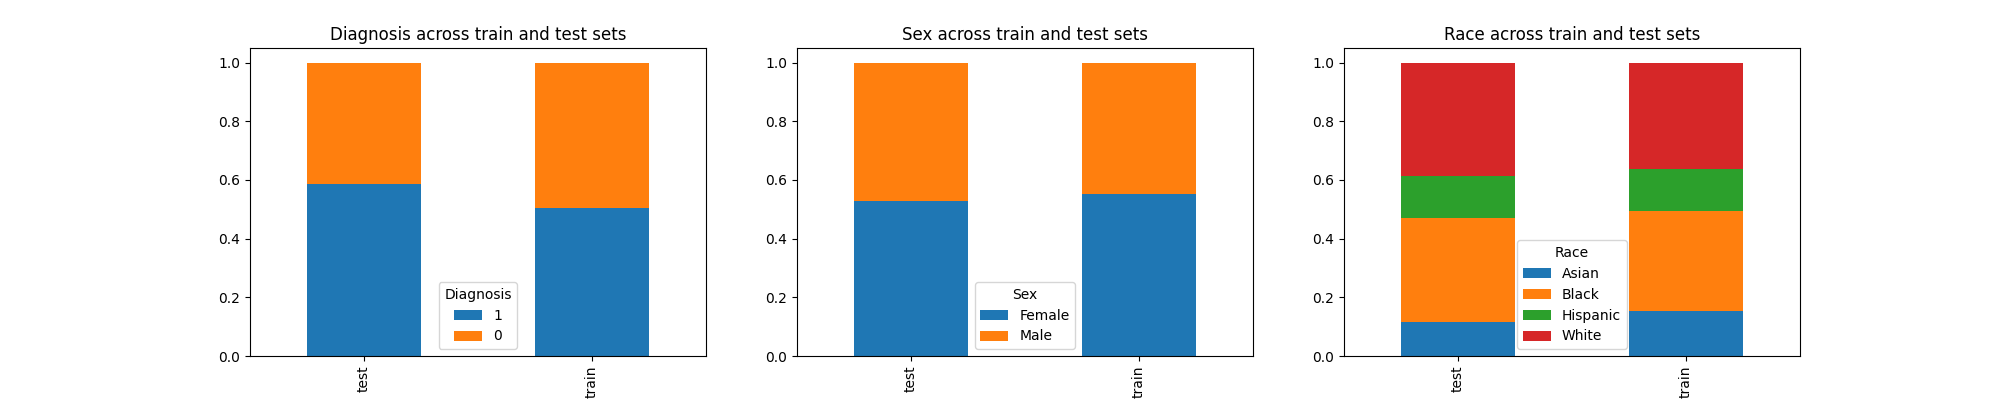 Diagnosis across train and test sets, Sex across train and test sets, Race across train and test sets